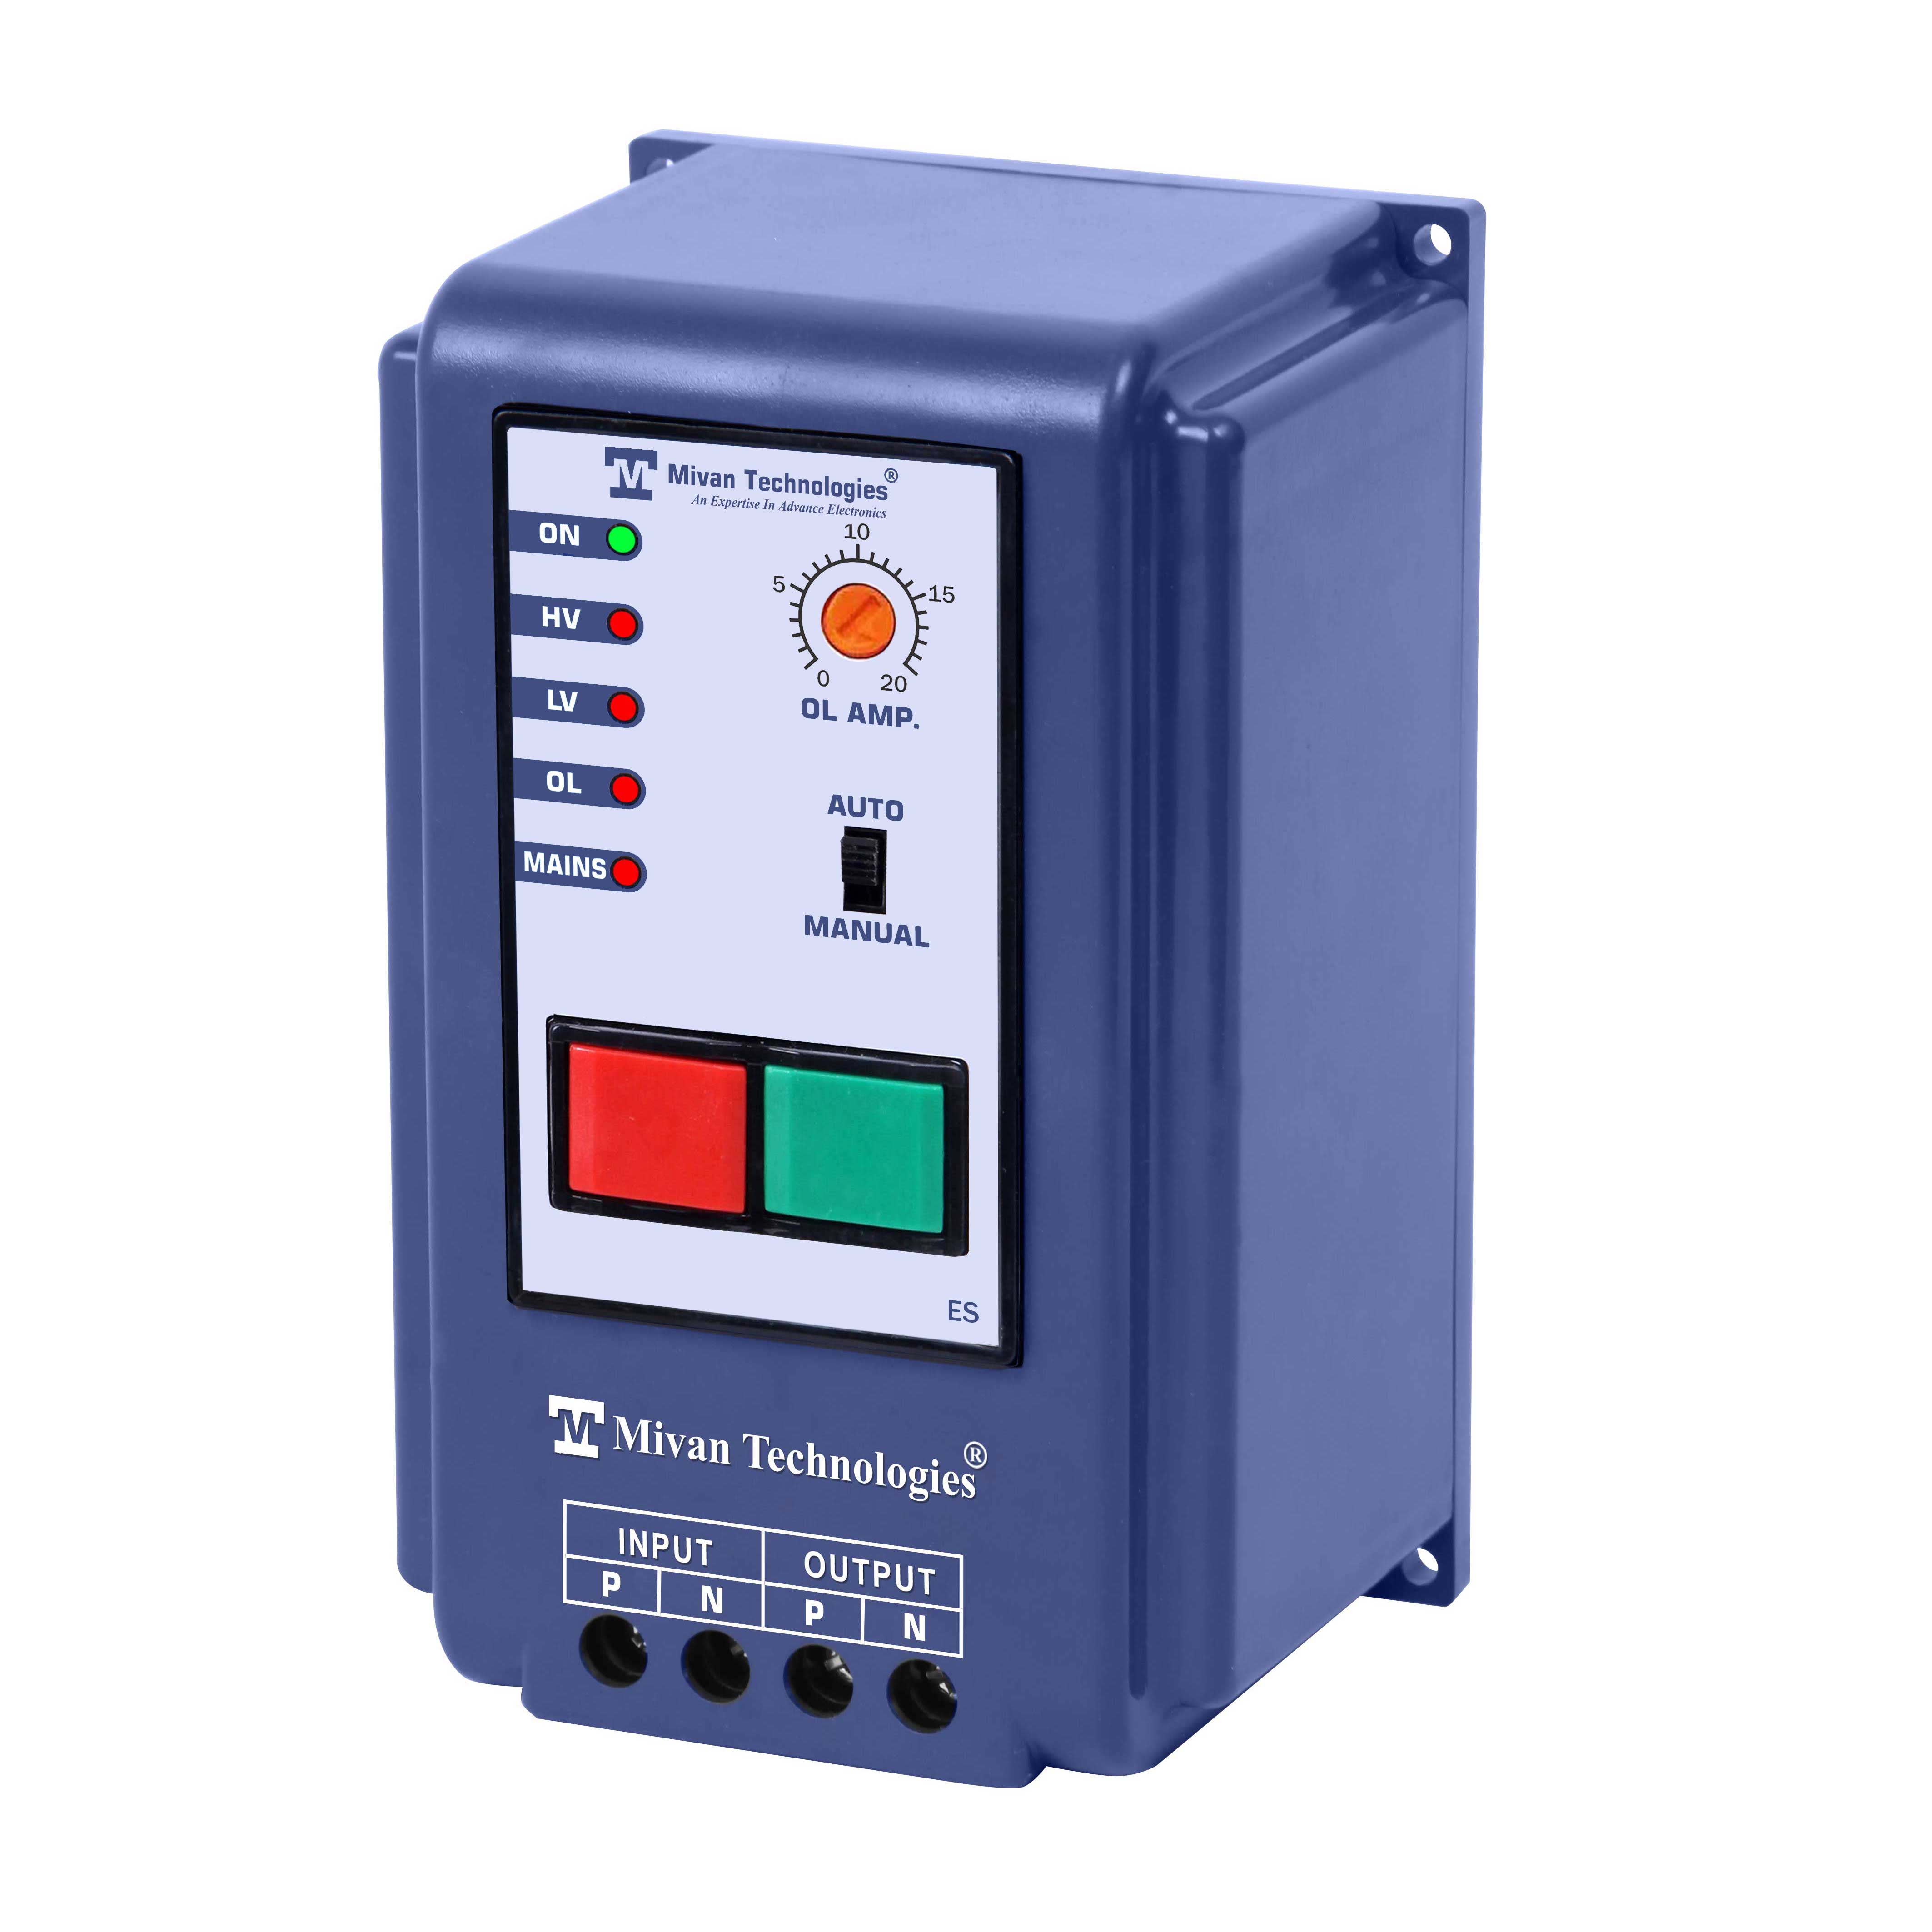 HD Single Phase Voltage protection relay with high and  low voltage and overload protection suitable for all single phase appliances Suitable up to 3 hp motor  ES